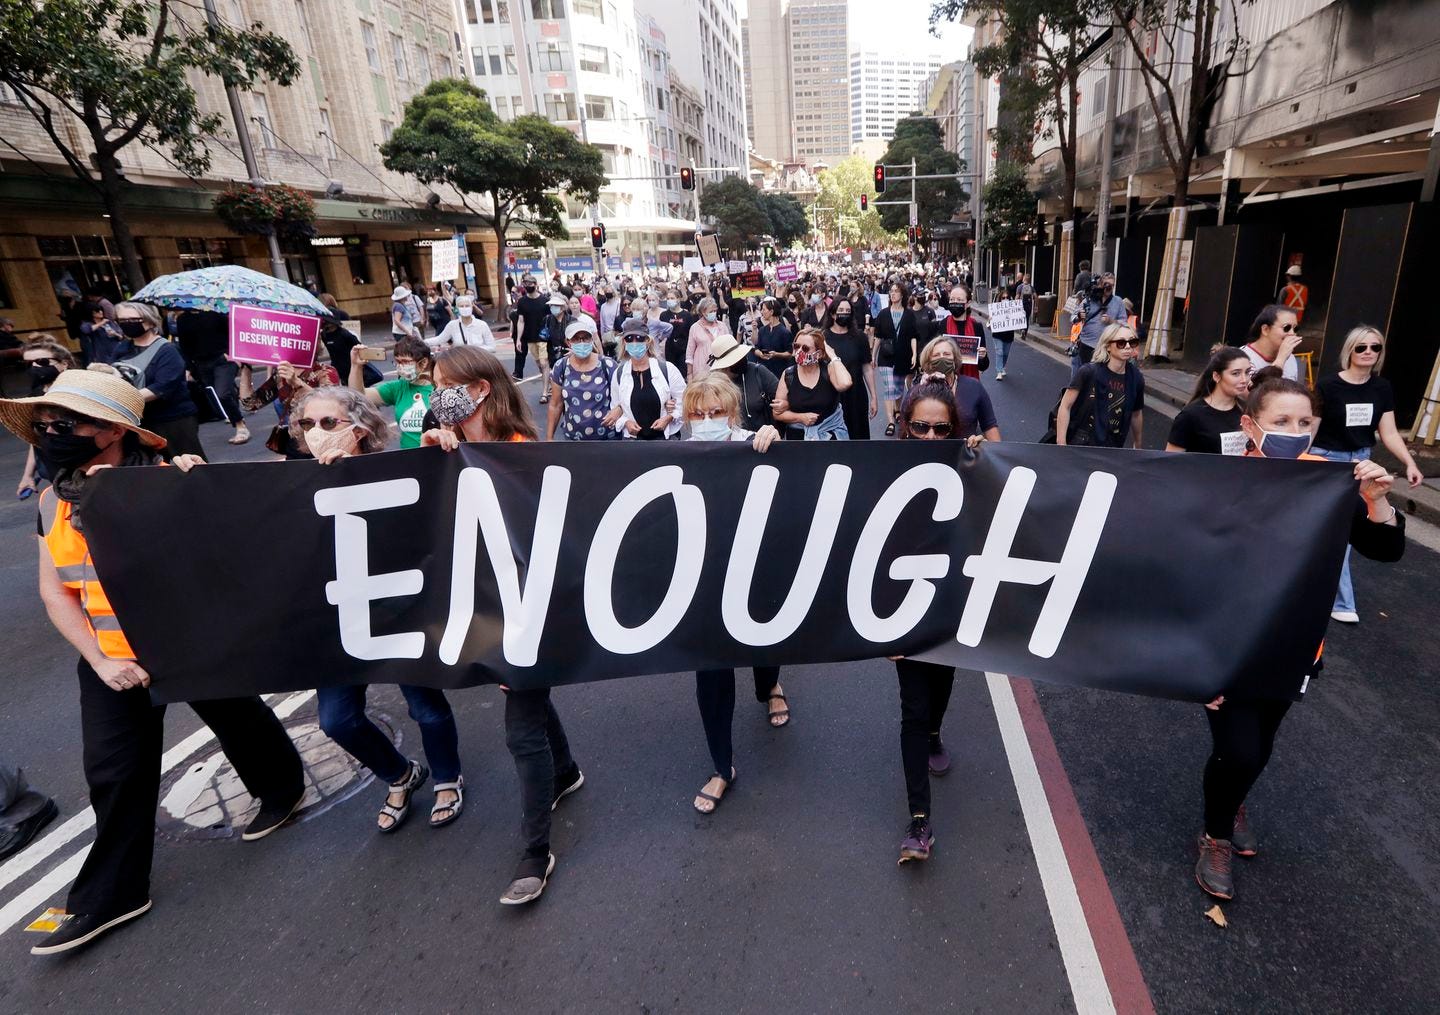 Thousands of people with placards and banners rally demanding justice for women in Sydney, on Monday, as the government reels from two separate allegations. The rally was one of several across Australia including in Canberra, Melbourne, Brisbane, and Hobart calling out sexism, misogyny and dangerous workplace cultures.